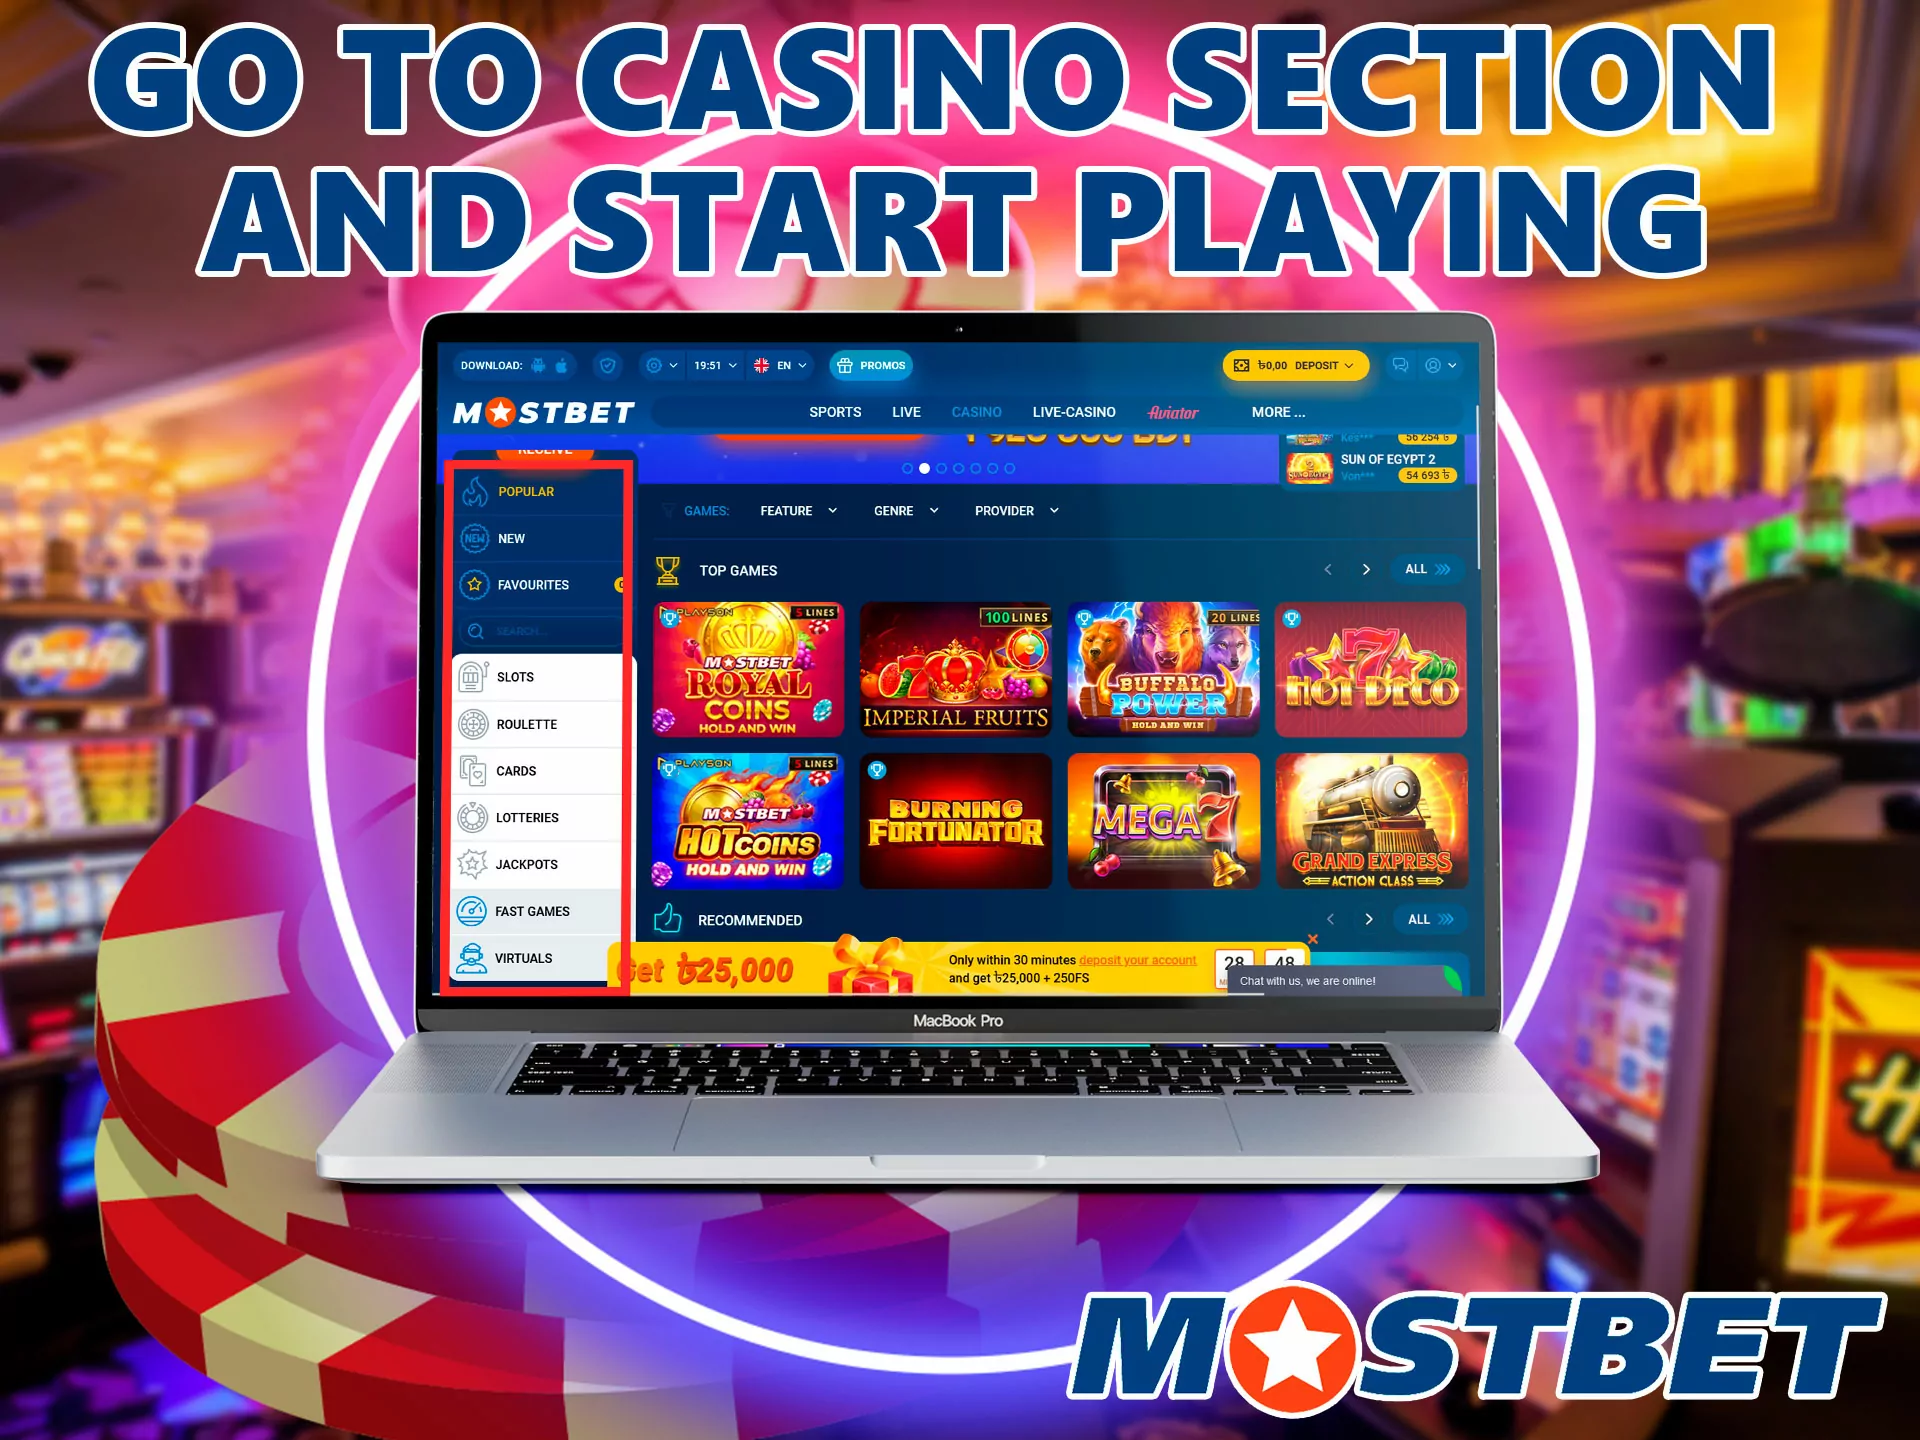 Finally, on the main page of Mostbet Bangladesh, select your favorite section and start playing.